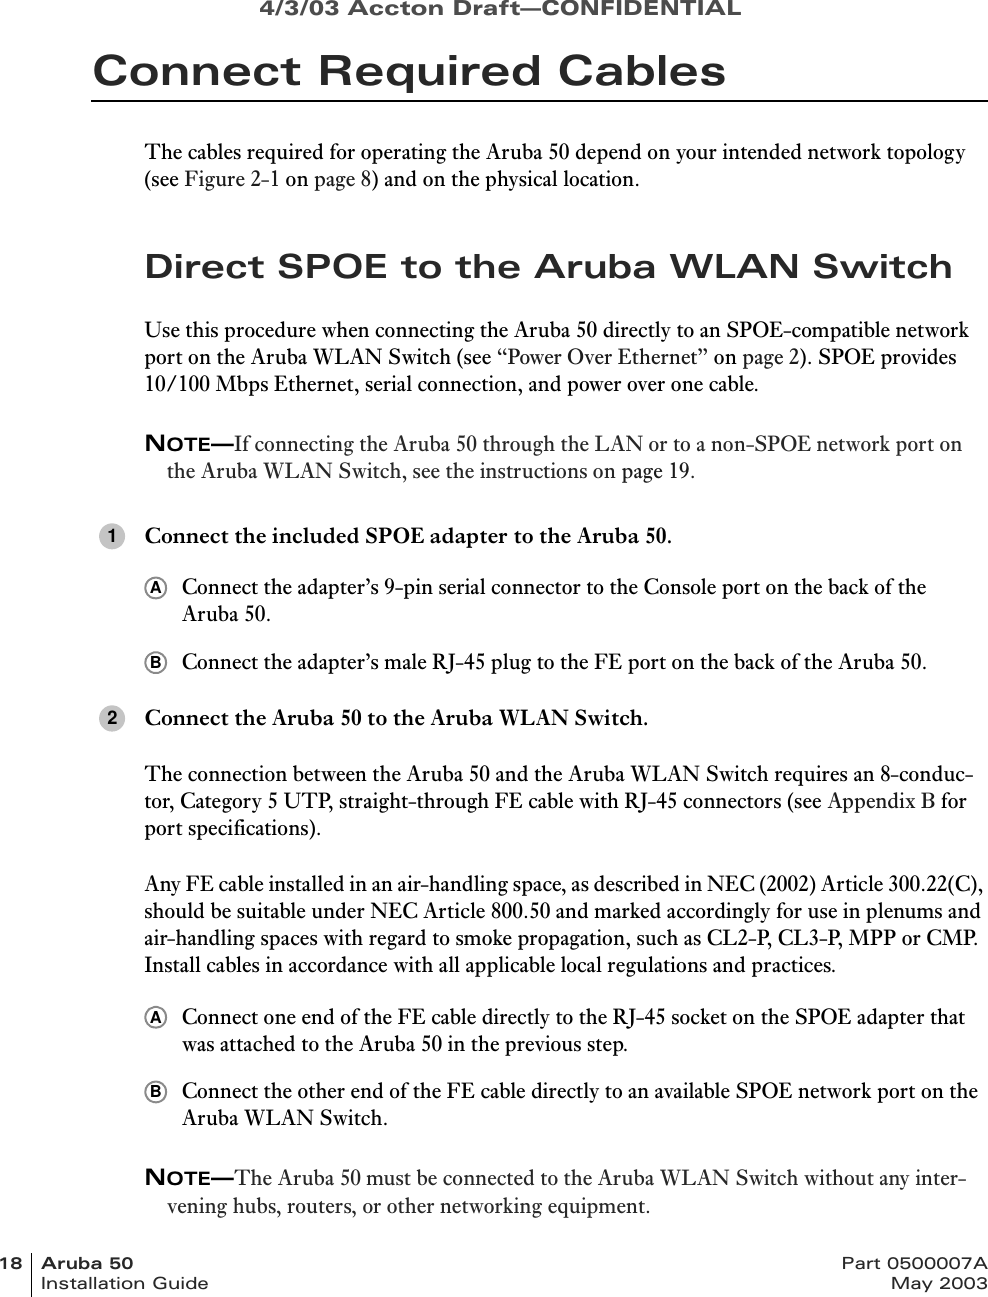 4/3/03 Accton Draft—CONFIDENTIAL18 Aruba 50 Part 0500007AInstallation Guide May 2003Connect Required CablesThe cables required for operating the Aruba 50 depend on your intended network topology (see Figure 2-1 on page 8) and on the physical location.Direct SPOE to the Aruba WLAN SwitchUse this procedure when connecting the Aruba 50 directly to an SPOE-compatible network port on the Aruba WLAN Switch (see “Power Over Ethernet” on page 2). SPOE provides 10/100 Mbps Ethernet, serial connection, and power over one cable.NOTE—If connecting the Aruba 50 through the LAN or to a non-SPOE network port on the Aruba WLAN Switch, see the instructions on page 19.Connect the included SPOE adapter to the Aruba 50.Connect the adapter’s 9-pin serial connector to the Console port on the back of the Aruba 50.Connect the adapter’s male RJ-45 plug to the FE port on the back of the Aruba 50.Connect the Aruba 50 to the Aruba WLAN Switch.The connection between the Aruba 50 and the Aruba WLAN Switch requires an 8-conduc-tor, Category 5 UTP, straight-through FE cable with RJ-45 connectors (see Appendix B for port specifications).Any FE cable installed in an air-handling space, as described in NEC (2002) Article 300.22(C), should be suitable under NEC Article 800.50 and marked accordingly for use in plenums and air-handling spaces with regard to smoke propagation, such as CL2-P, CL3-P, MPP or CMP. Install cables in accordance with all applicable local regulations and practices.Connect one end of the FE cable directly to the RJ-45 socket on the SPOE adapter that was attached to the Aruba 50 in the previous step.Connect the other end of the FE cable directly to an available SPOE network port on the Aruba WLAN Switch.NOTE—The Aruba 50 must be connected to the Aruba WLAN Switch without any inter-vening hubs, routers, or other networking equipment.1AB2AB